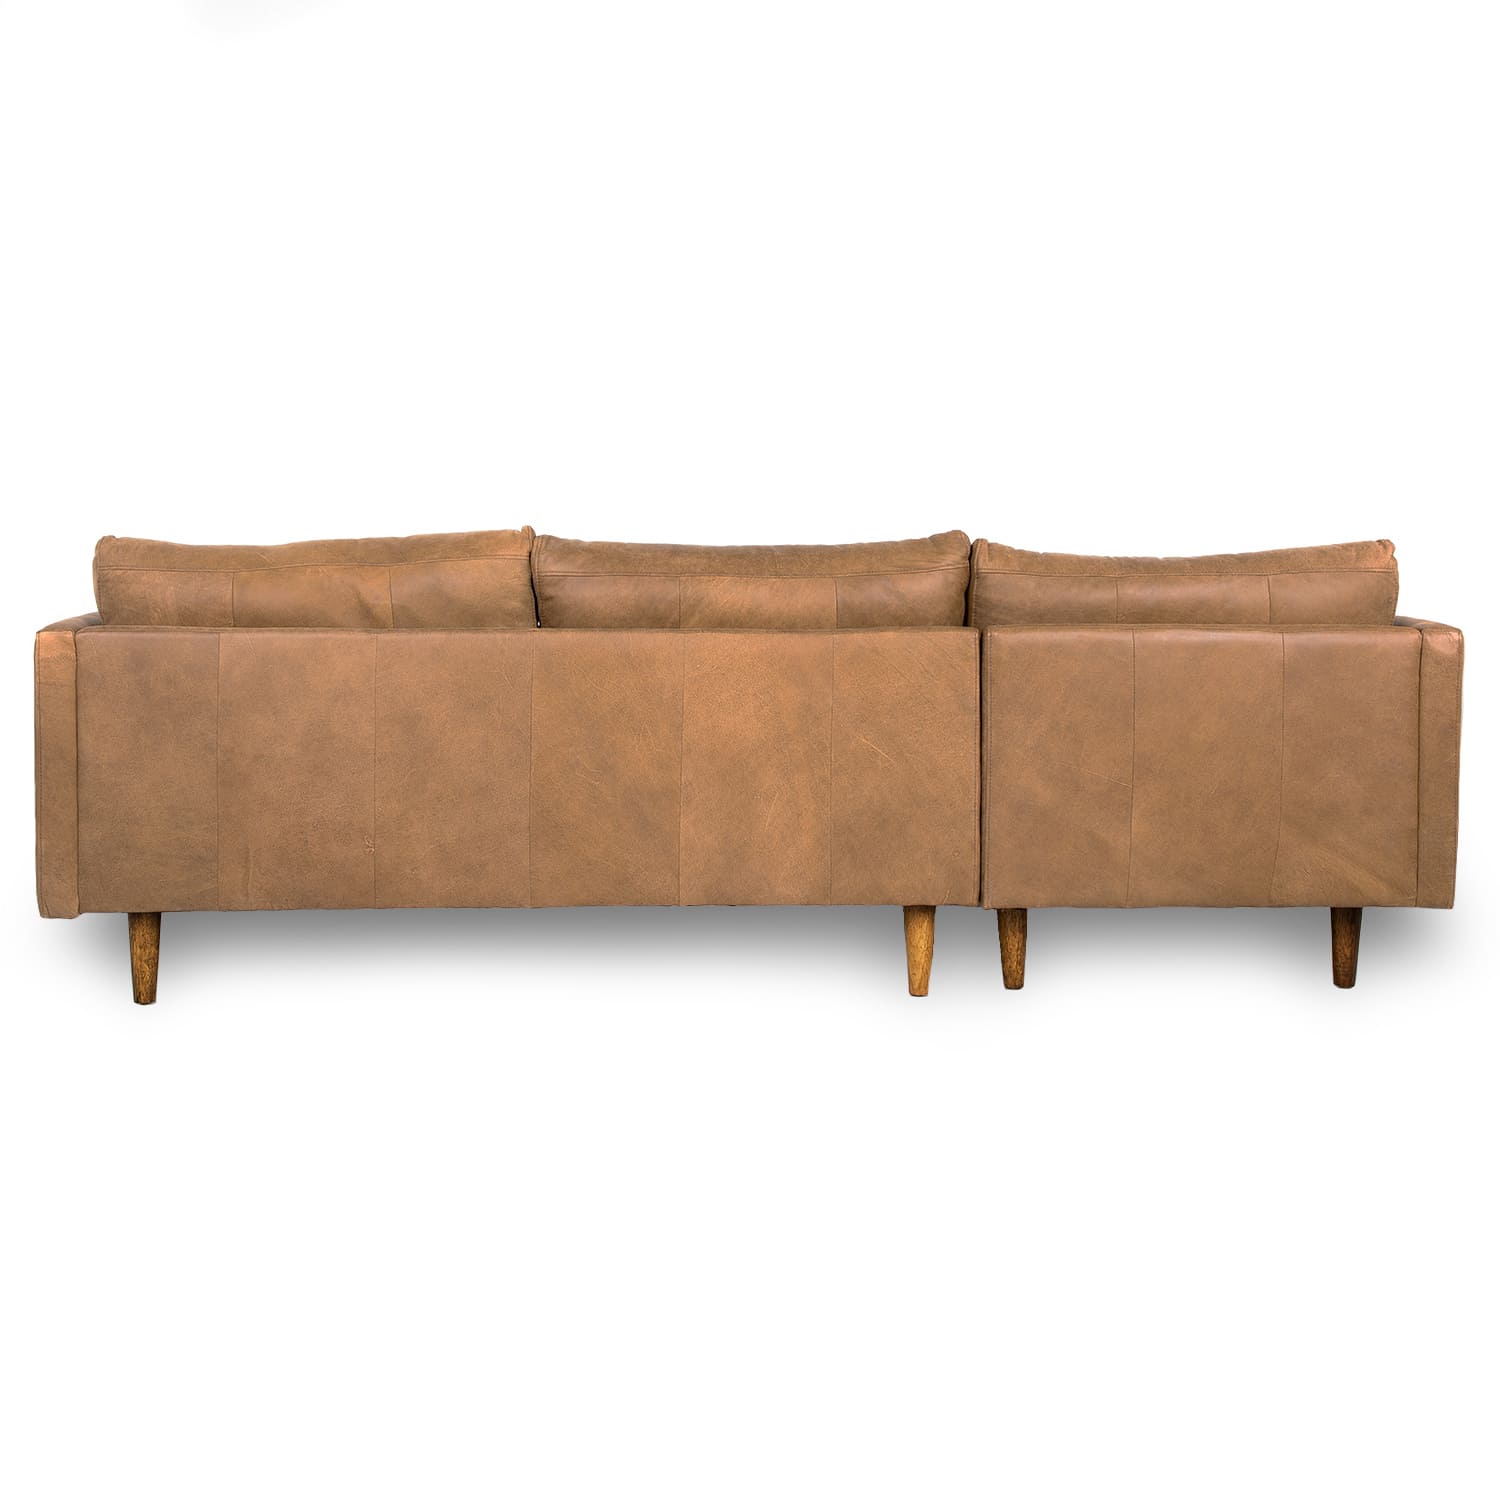 Jordie Leather Left Side Facing Sectional Chaise Lounge